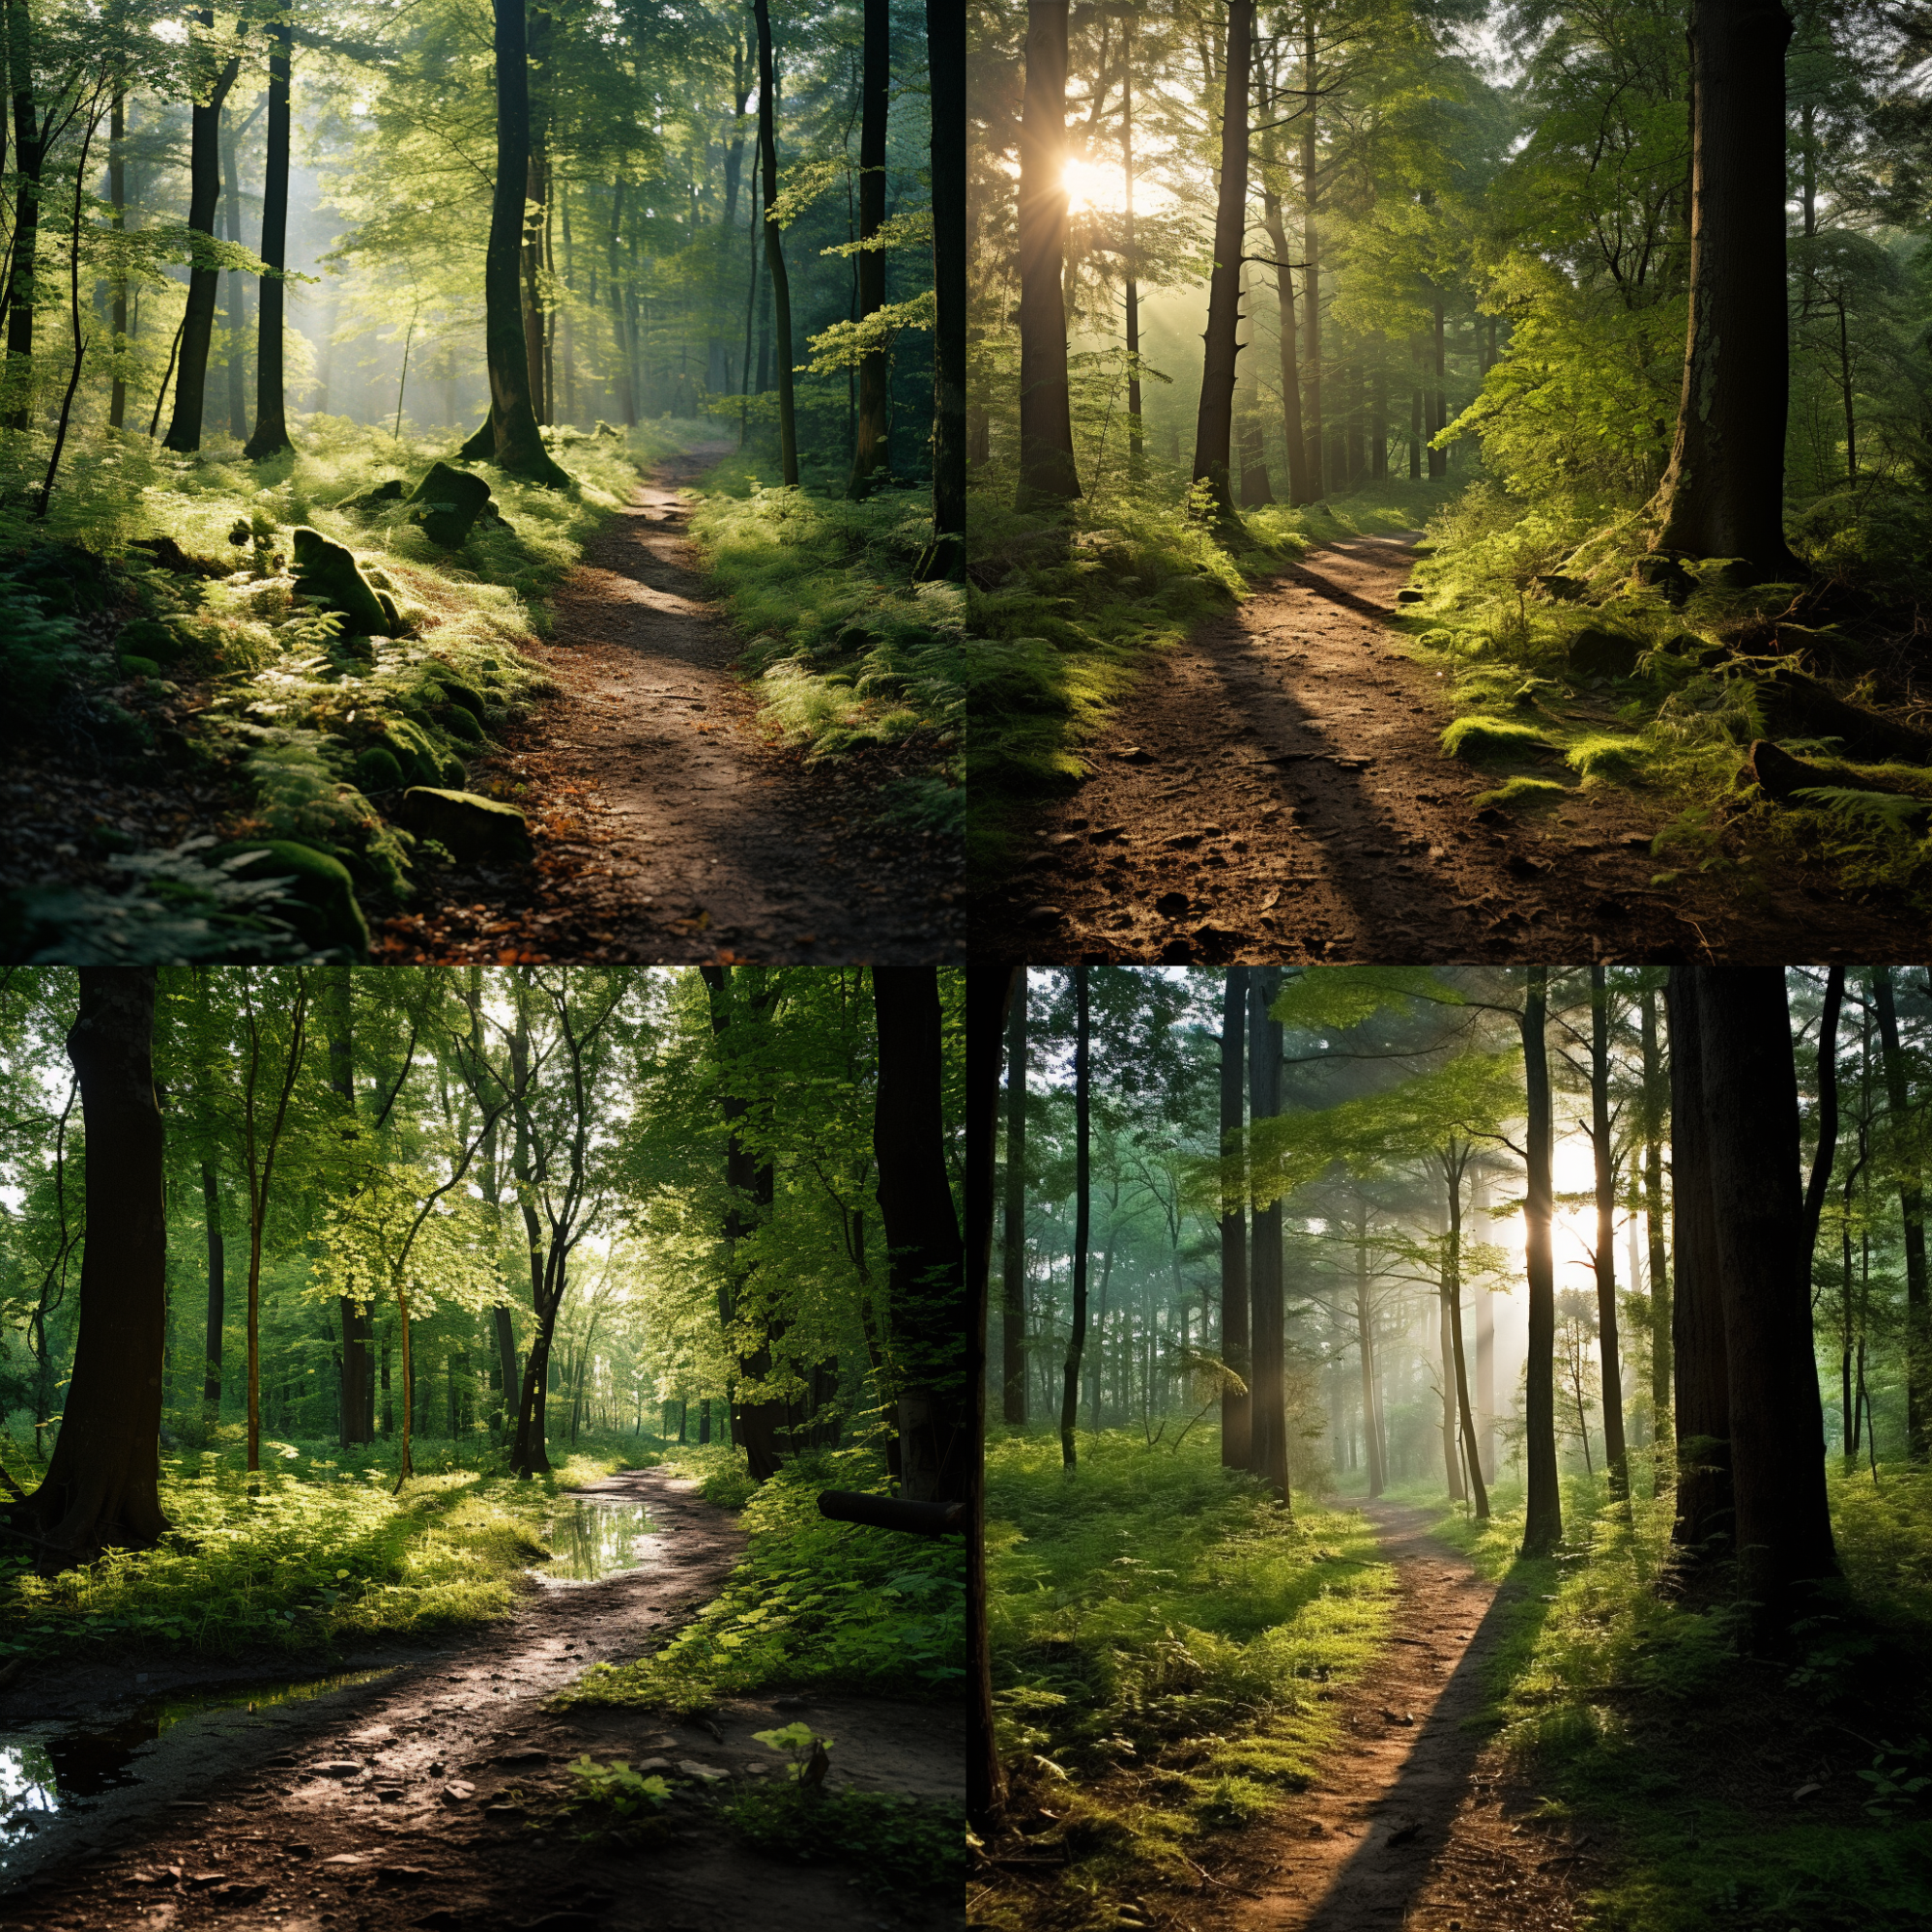 Four image options generated by Midjourney based on a nature walk prompt